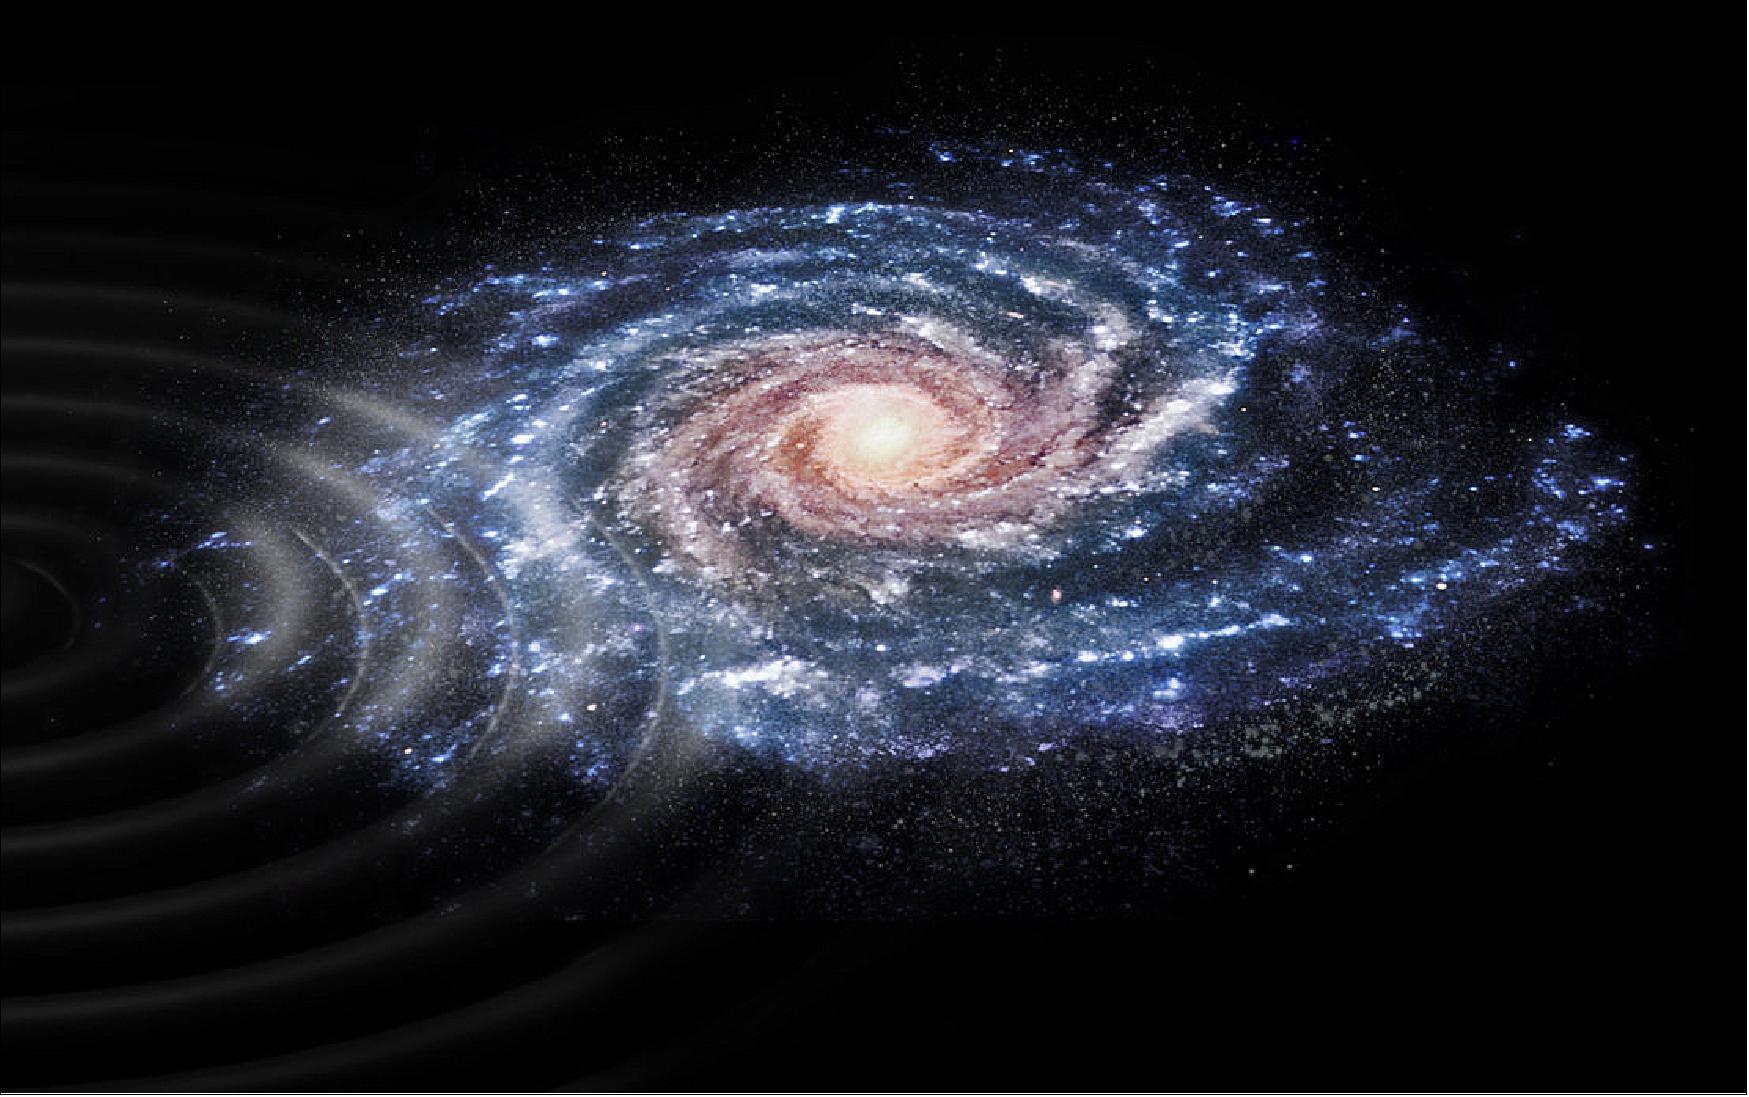 Figure 38: Artist's impression of a perturbation in the velocities of stars in our Galaxy, the Milky Way, that was revealed by ESA's star mapping mission, Gaia. Scientists analyzing data from Gaia's second release have shown our Milky Way galaxy is still enduring the effects of a near collision that set millions of stars moving like ripples on a pond (image credit: ESA, CC BY-SA 3.0 IGO)